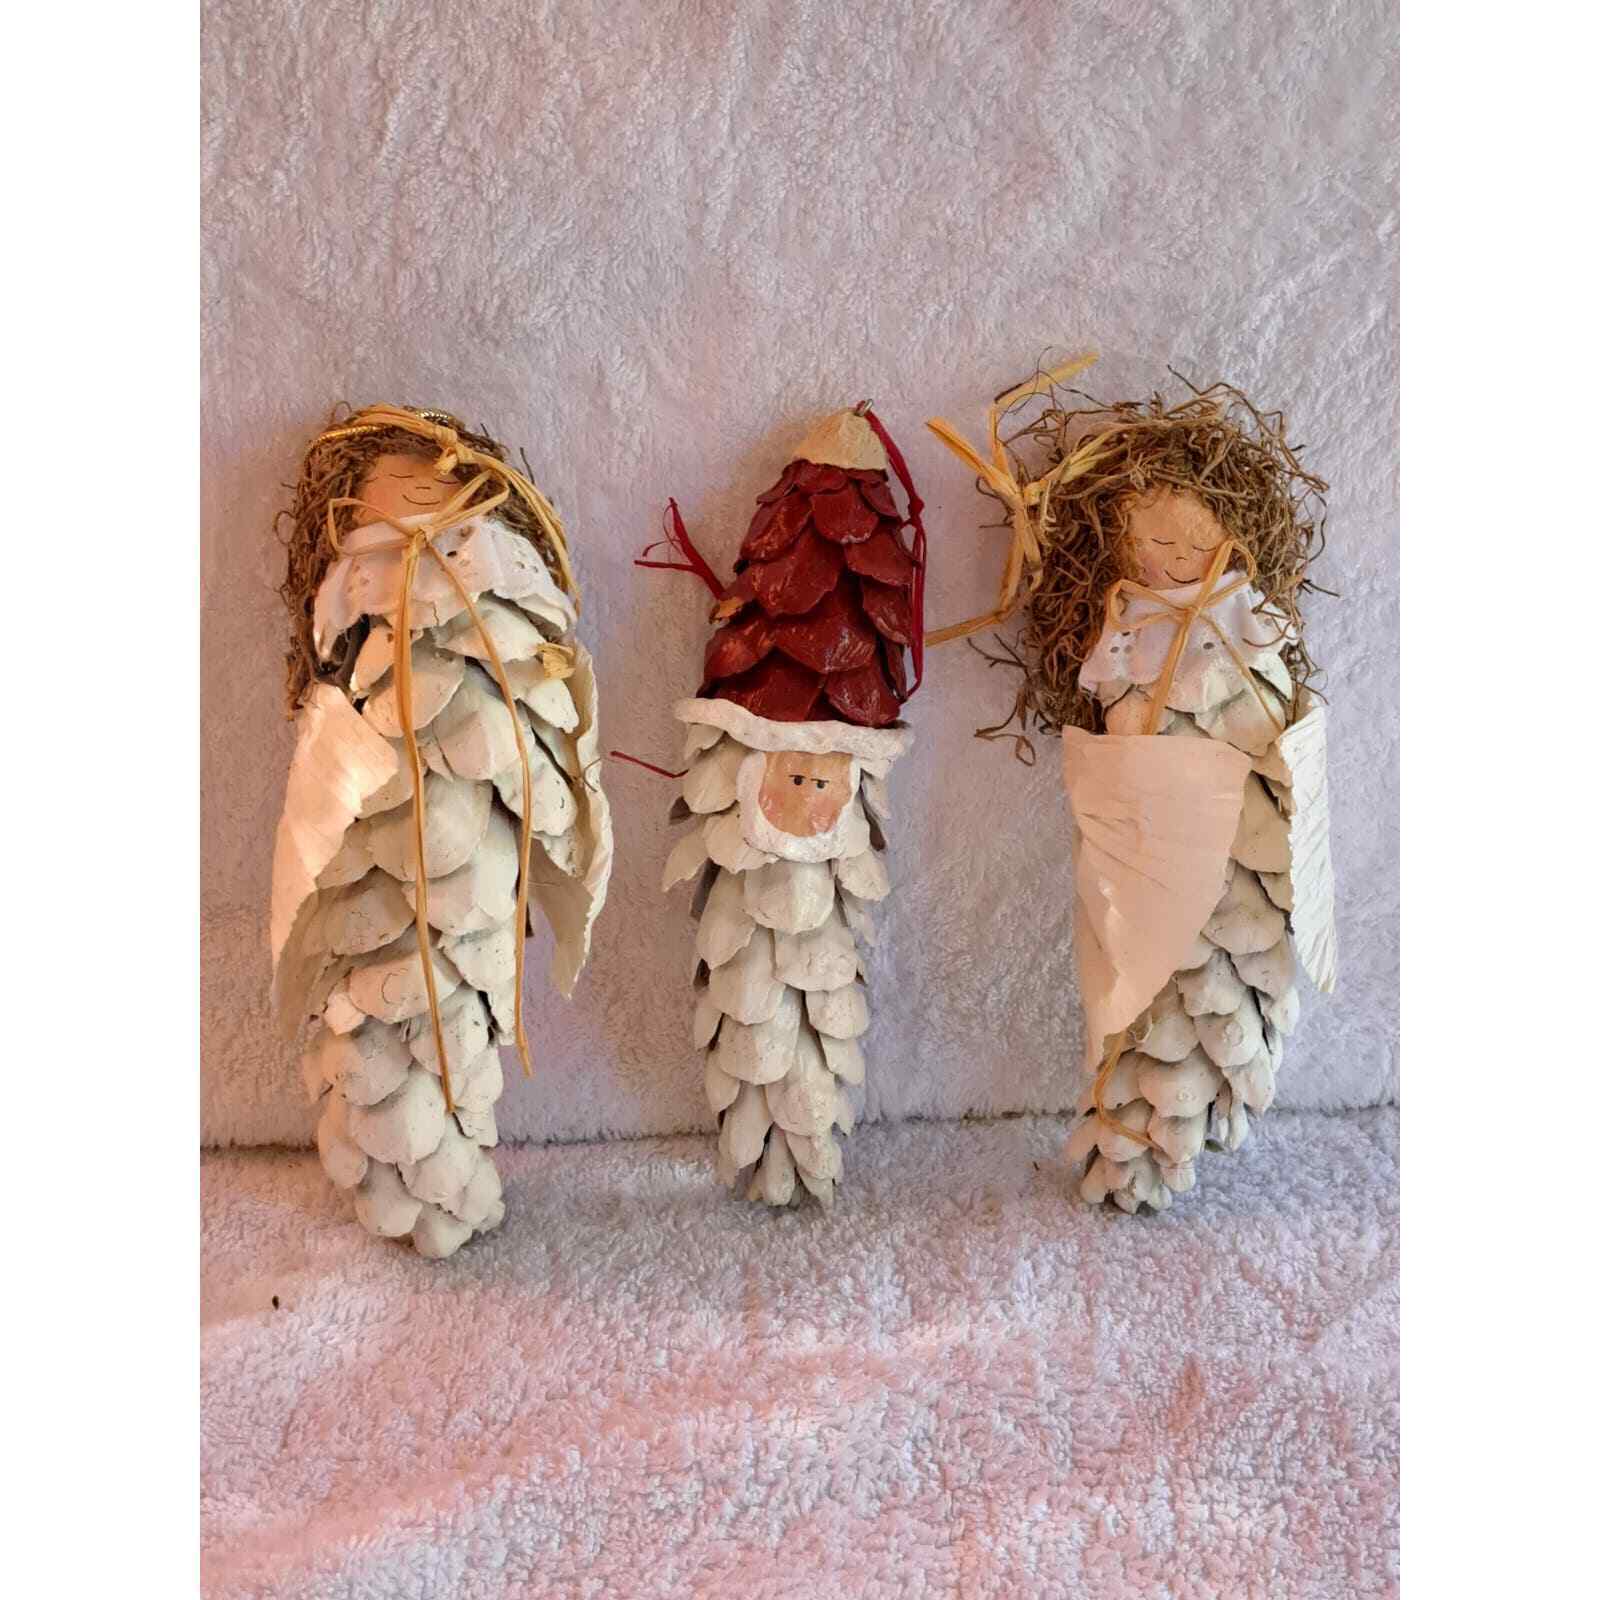 Vintage Hand Made Angel Ornaments Lot of 3 Pinecone Santa Clause Old World Farm